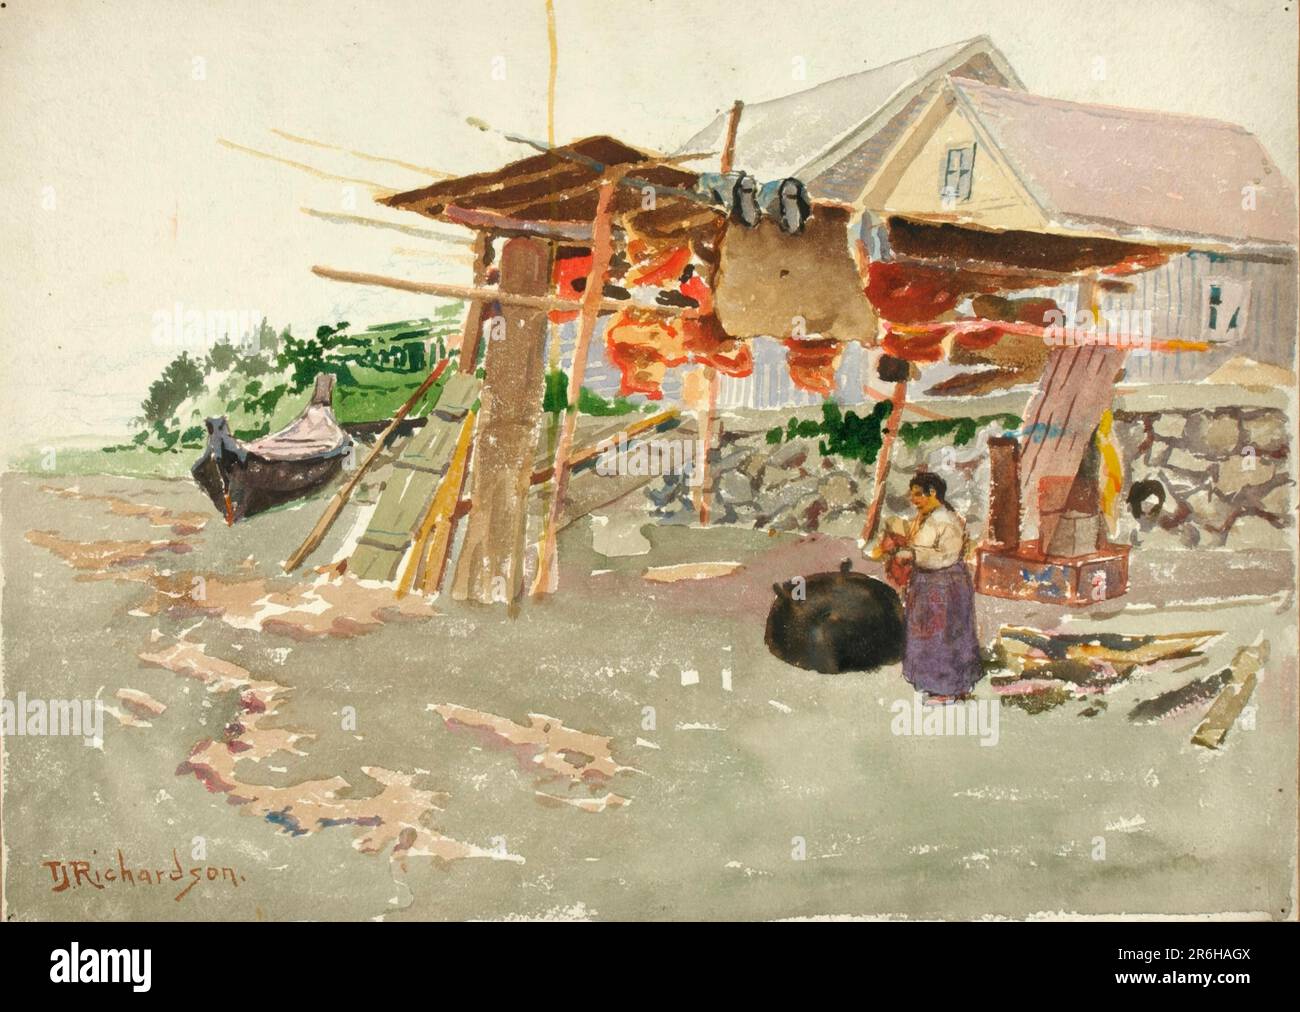 Salmon Drying, Indian Village, Alaska. Date: ca. 1880-1914. watercolor on paper, mounted on colored paper. Museum: Smithsonian American Art Museum. Stock Photo